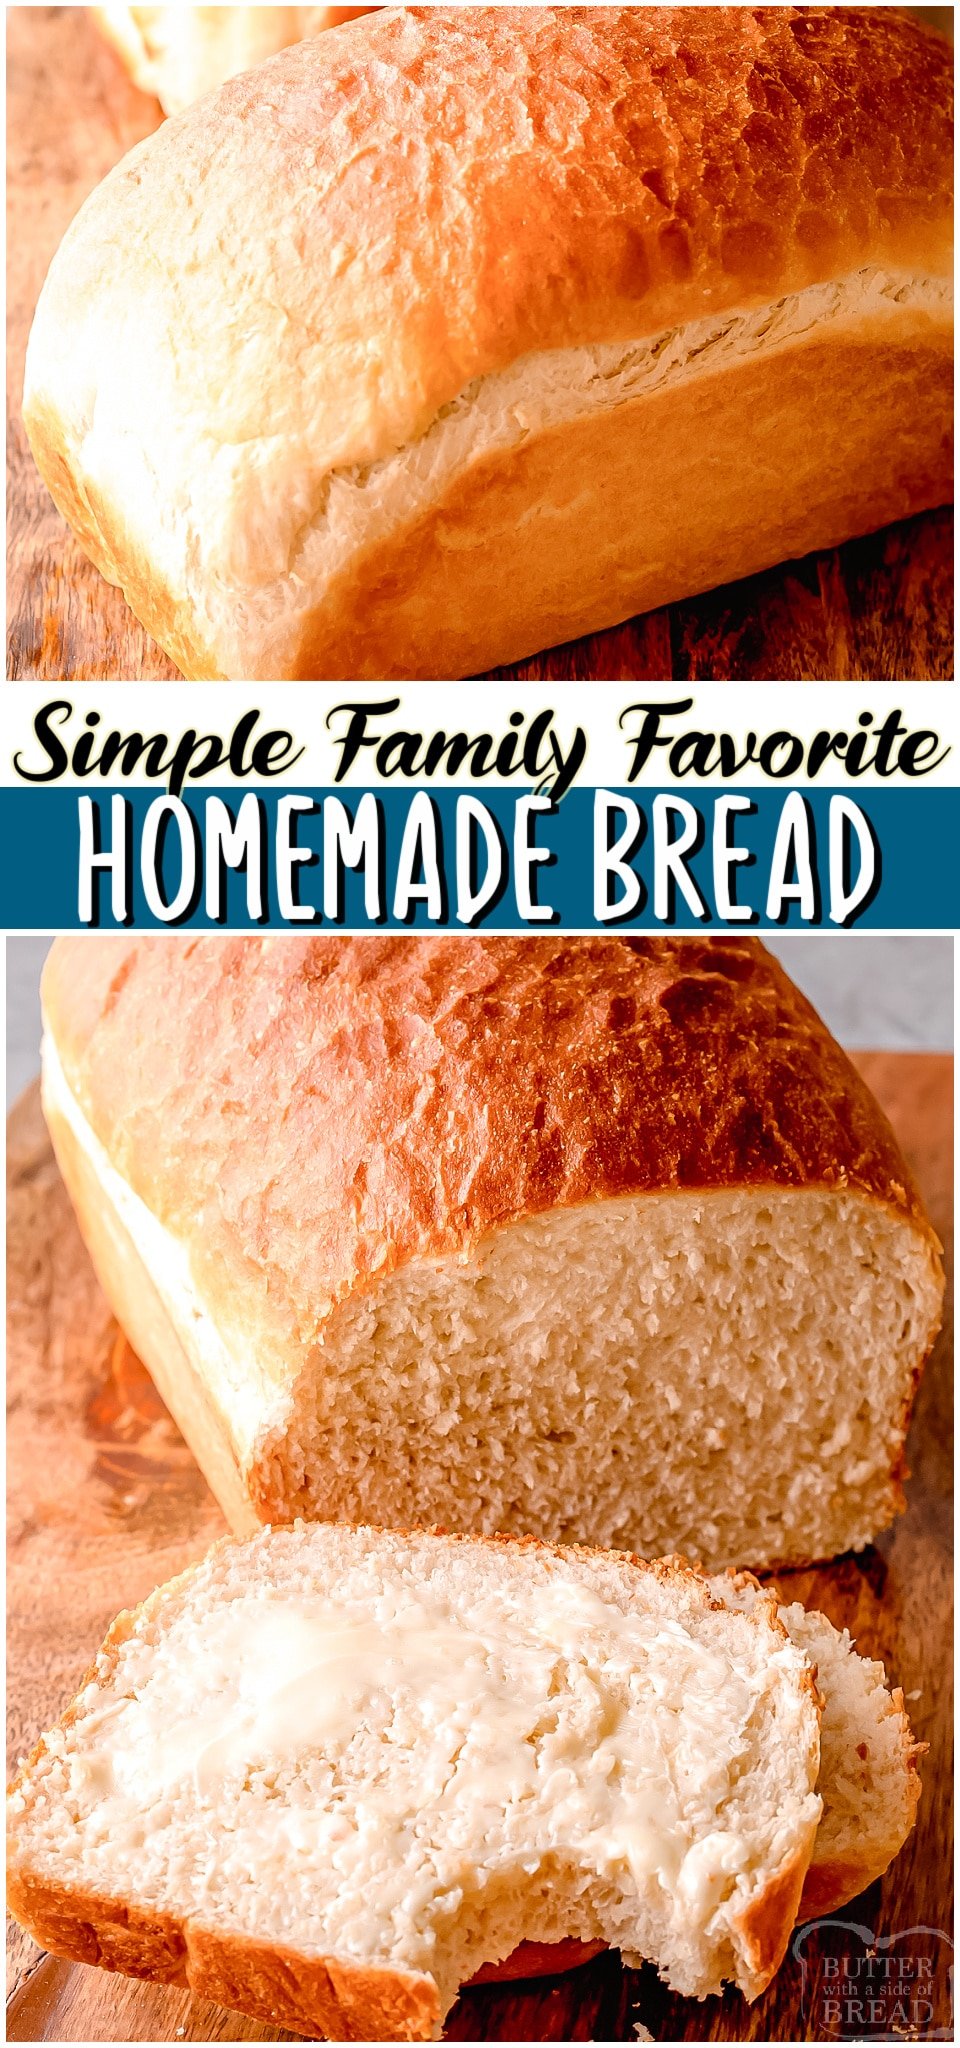 Homemade White Bread made with flour, yeast, butter & a bit of sugar and salt. Classic bread recipe that yields 2 loaves of homemade white bread perfect for toast & sandwiches.